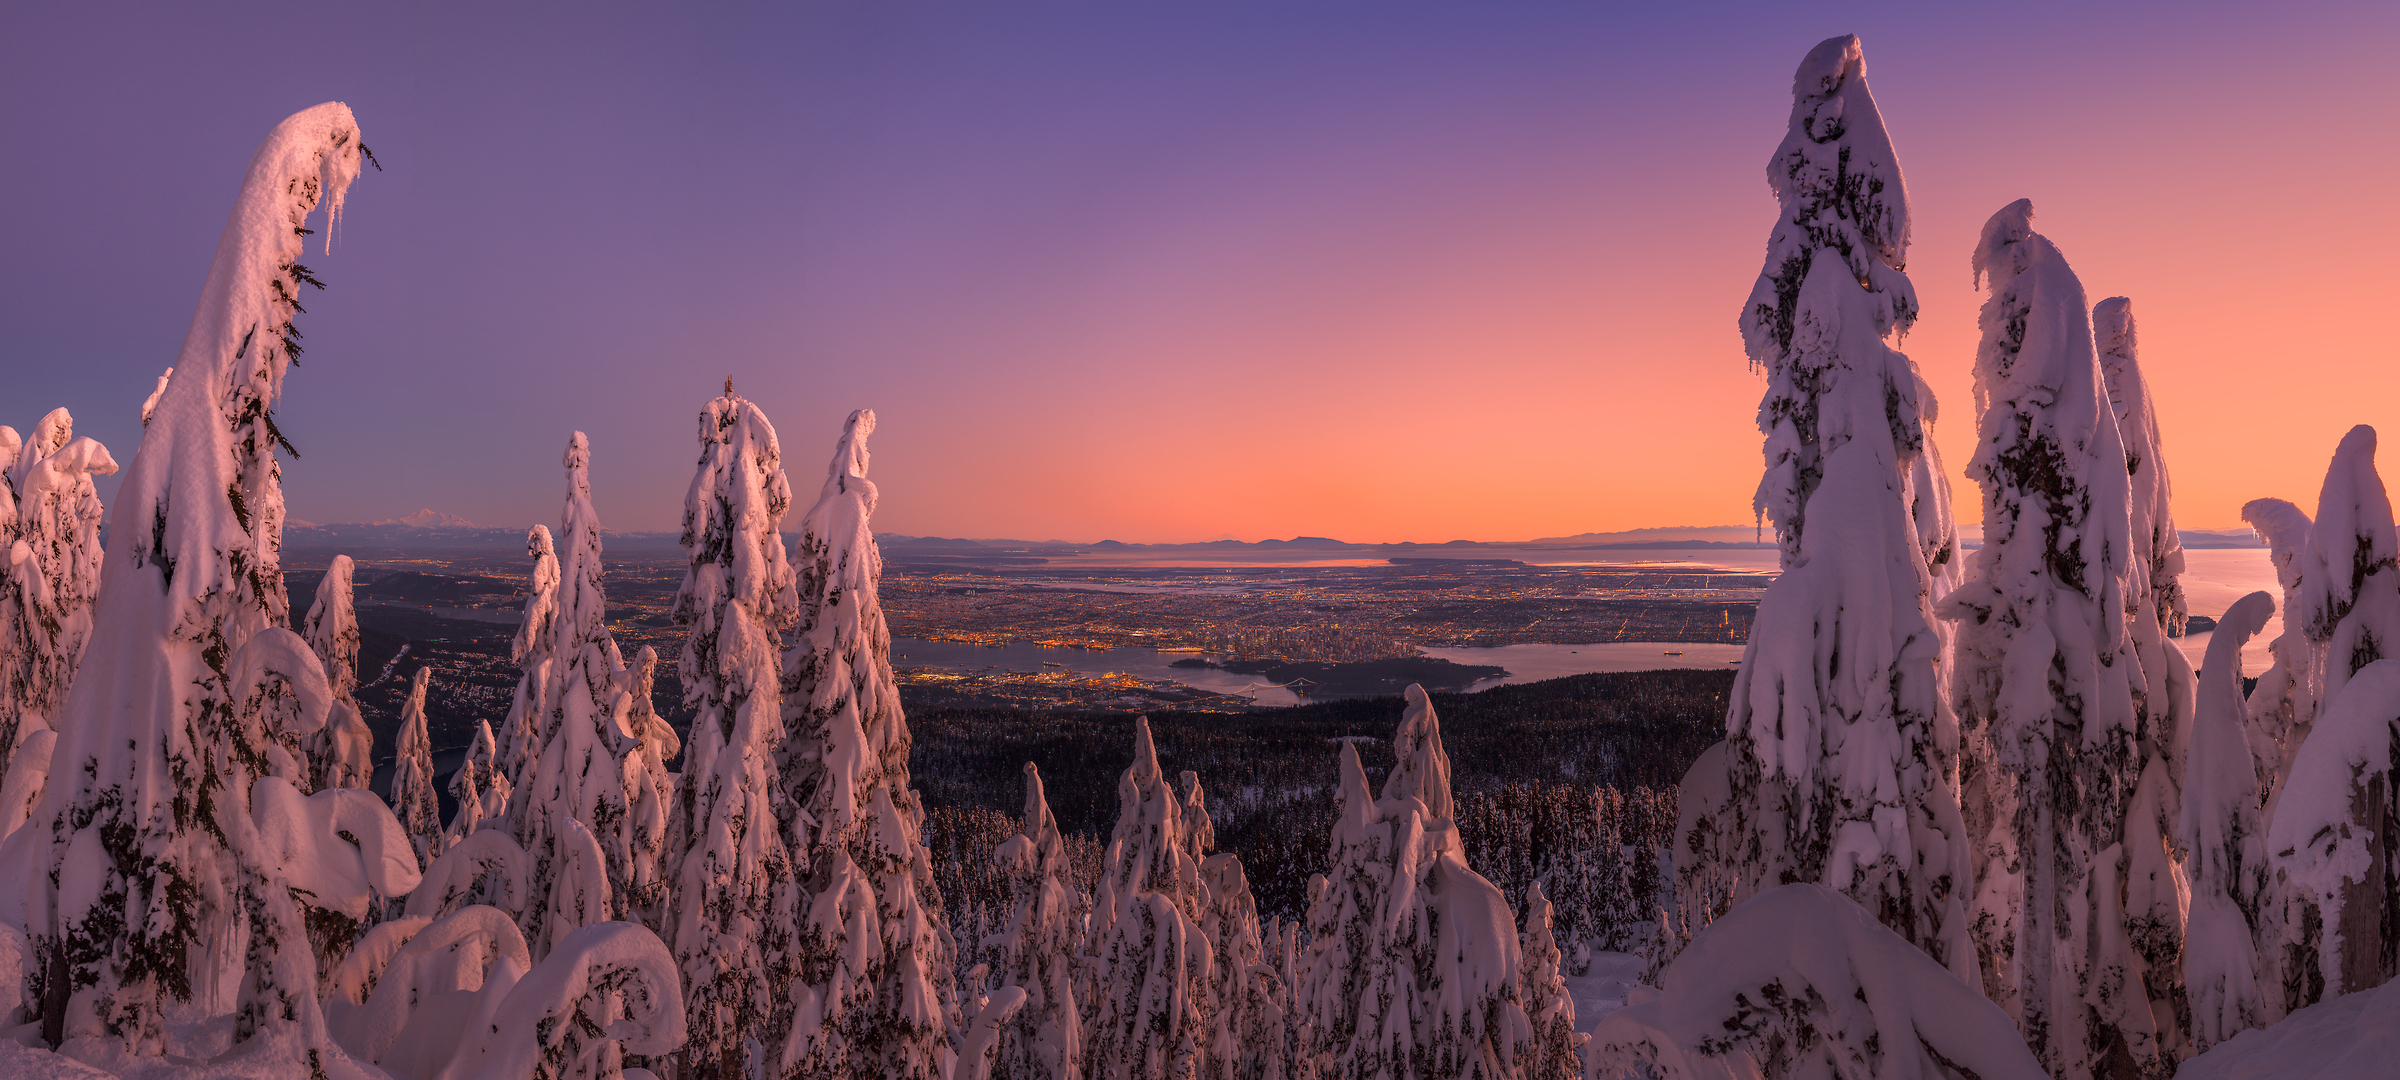 443 megapixels! A very high resolution, large-format VAST photo print of snow-covered trees overlooking a city at sunset from Hollyburn Peak; fine art landscape photo created by Chris Collacott in West Vancouver, British Columbia, Canada.